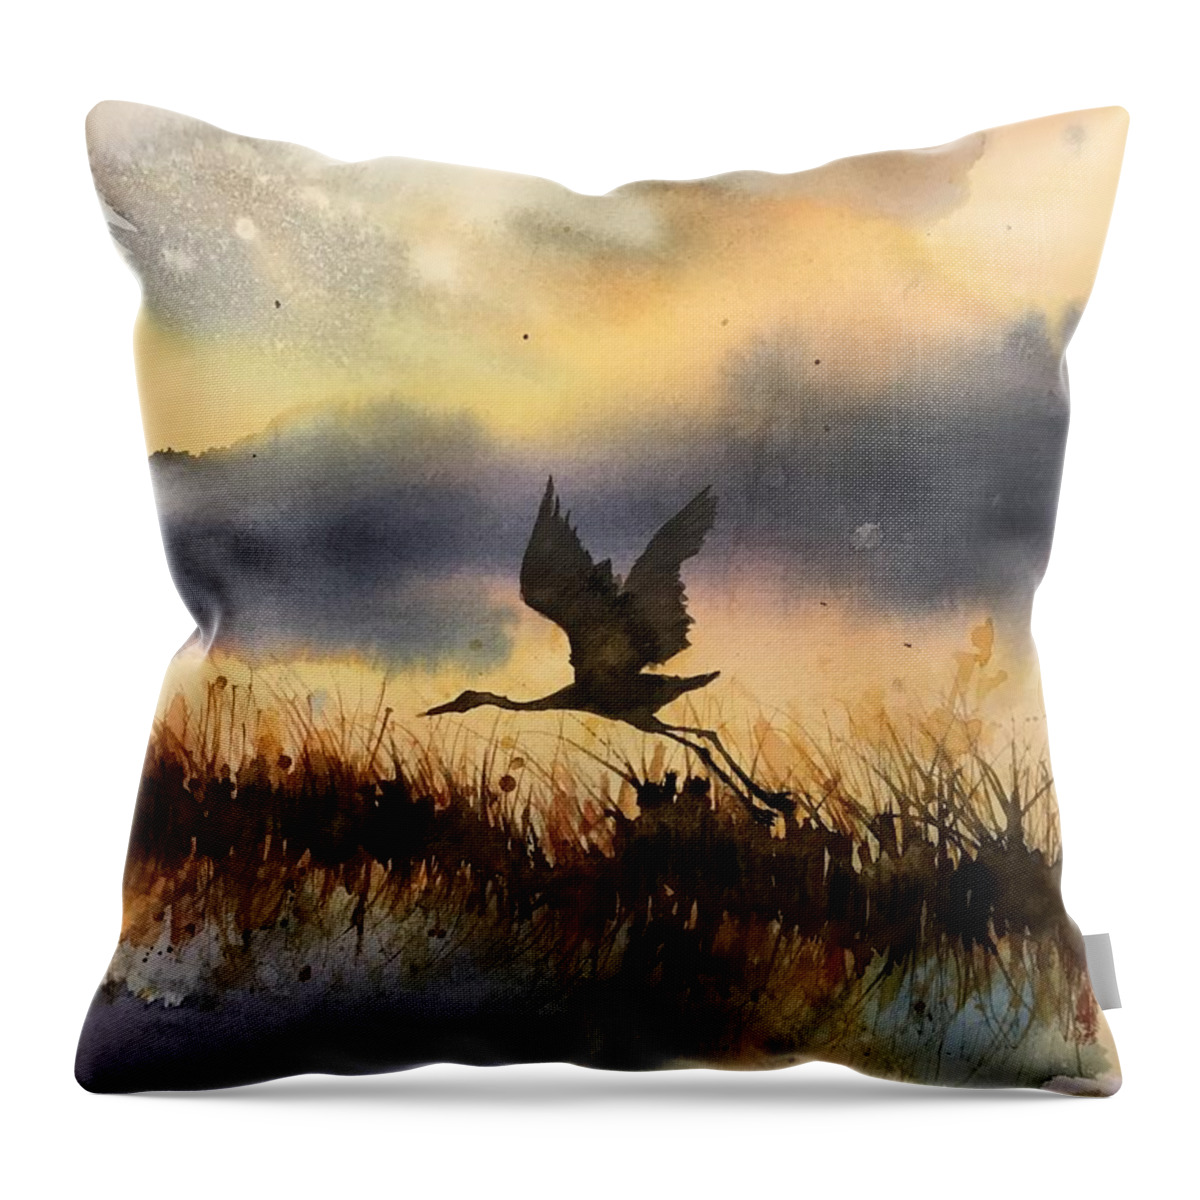 0012022 Throw Pillow featuring the painting 0012022 by Han in Huang wong